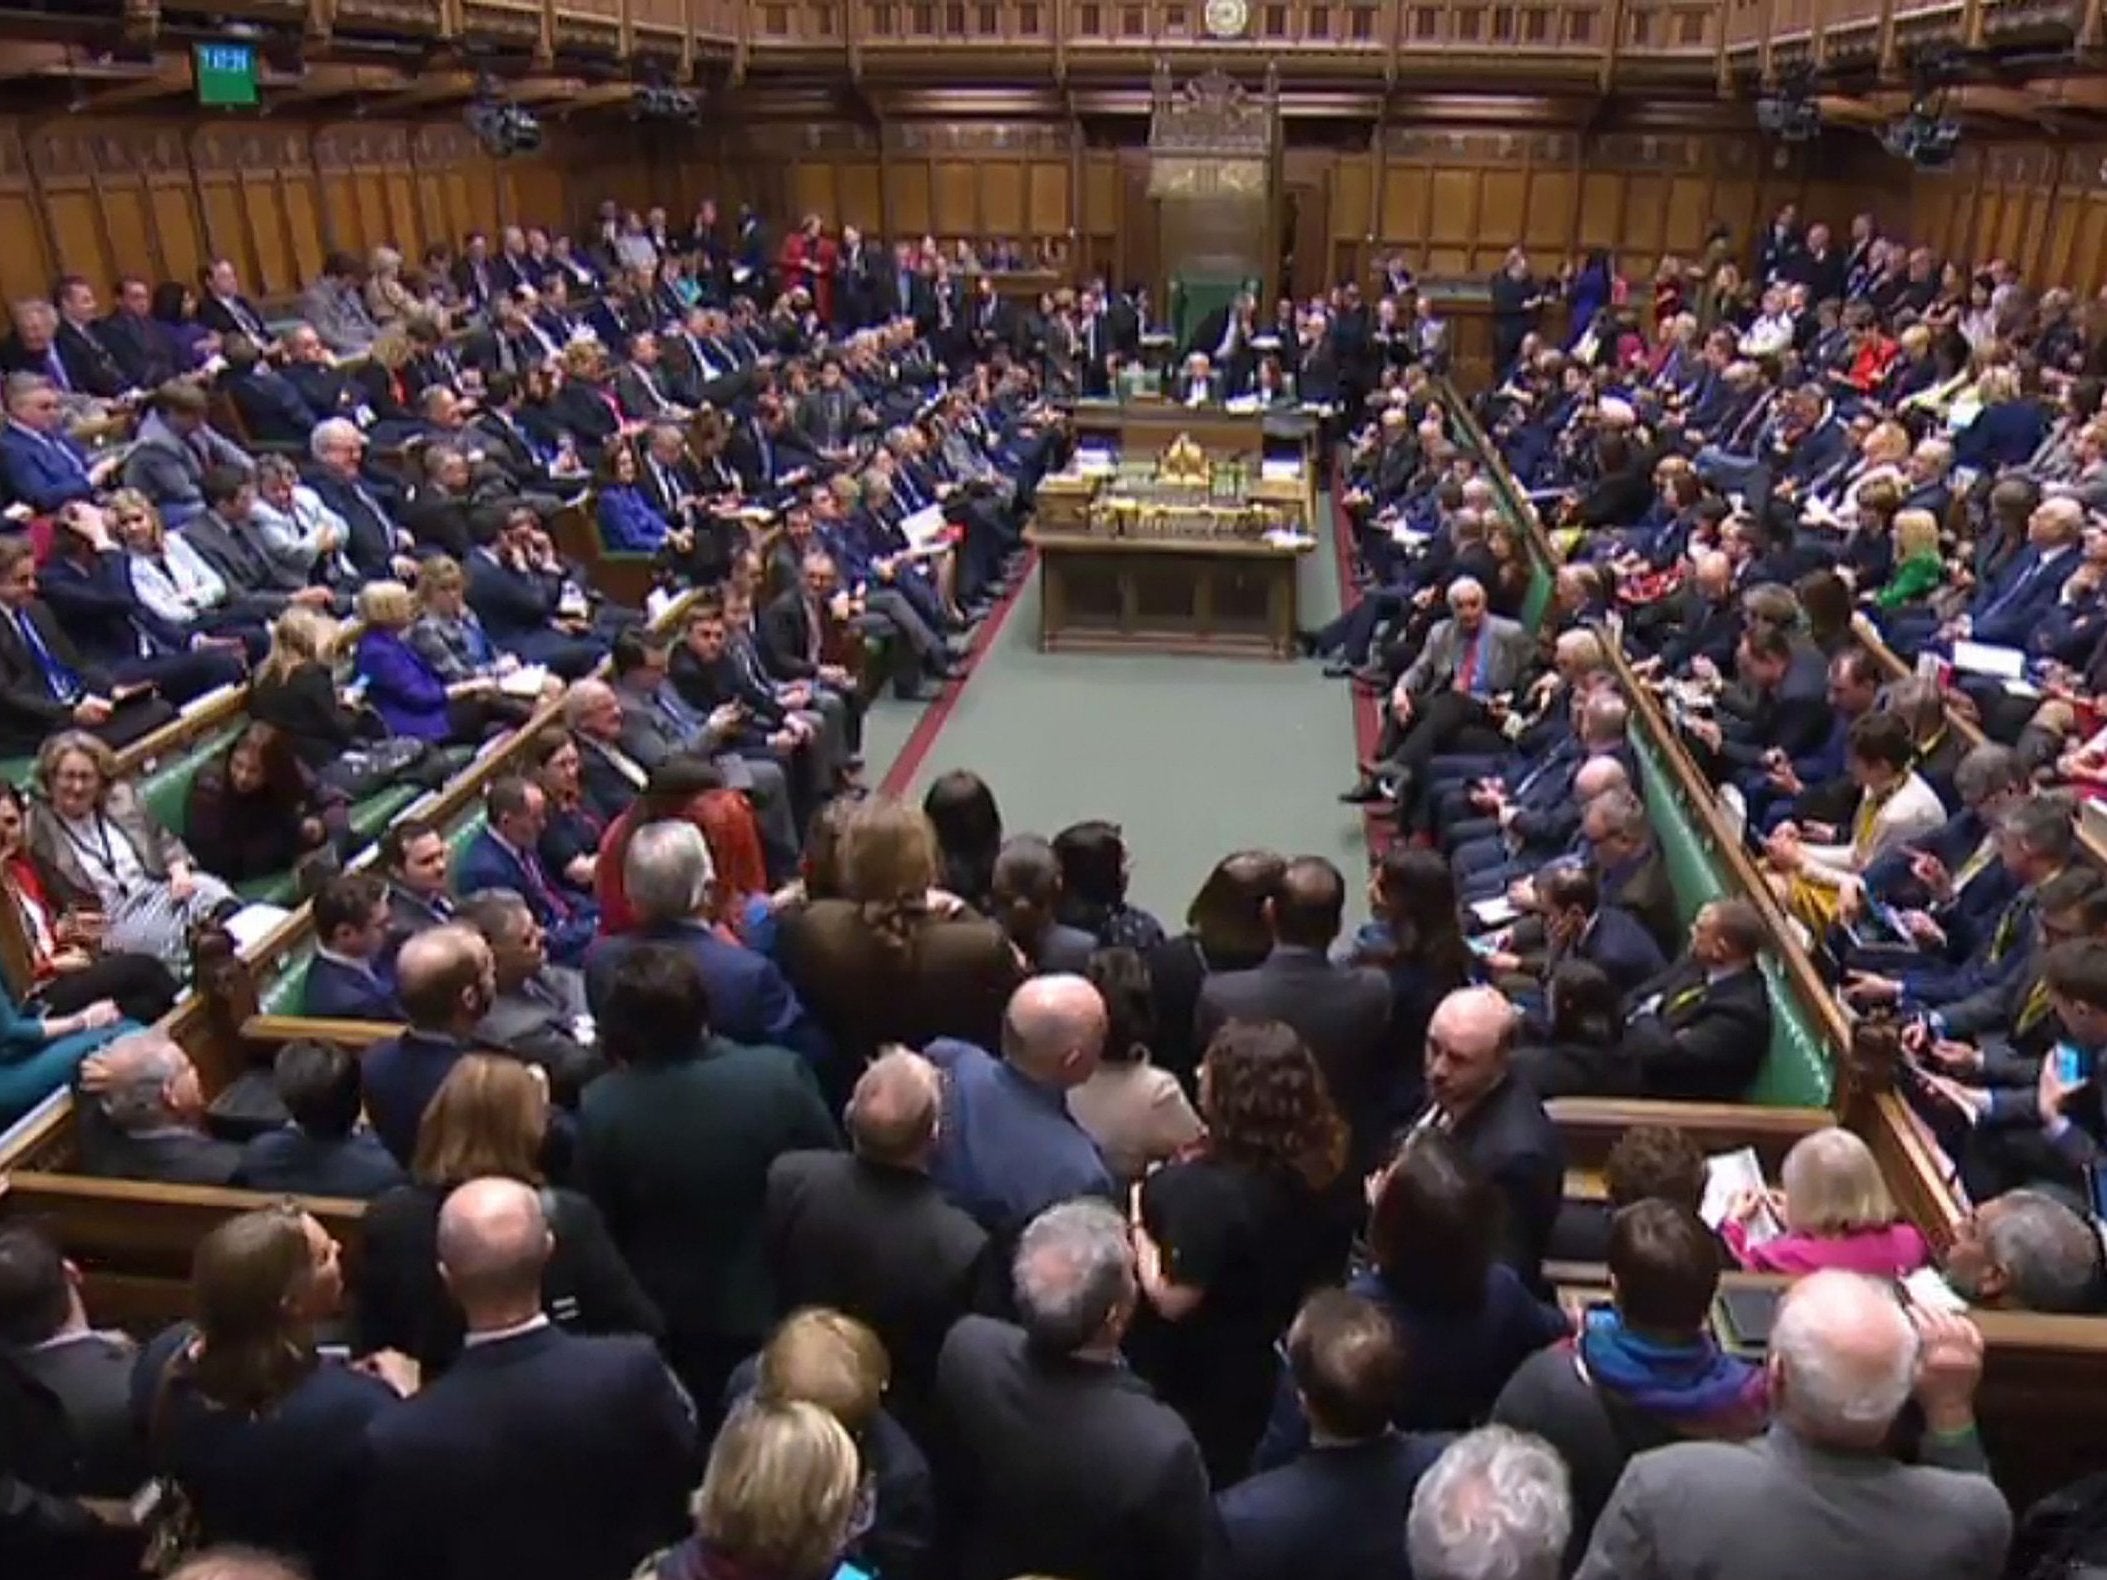 Packed House of Commons as members wait for the result of an amended motion on rejecting leaving the EU with no deal on 13 March 2019.